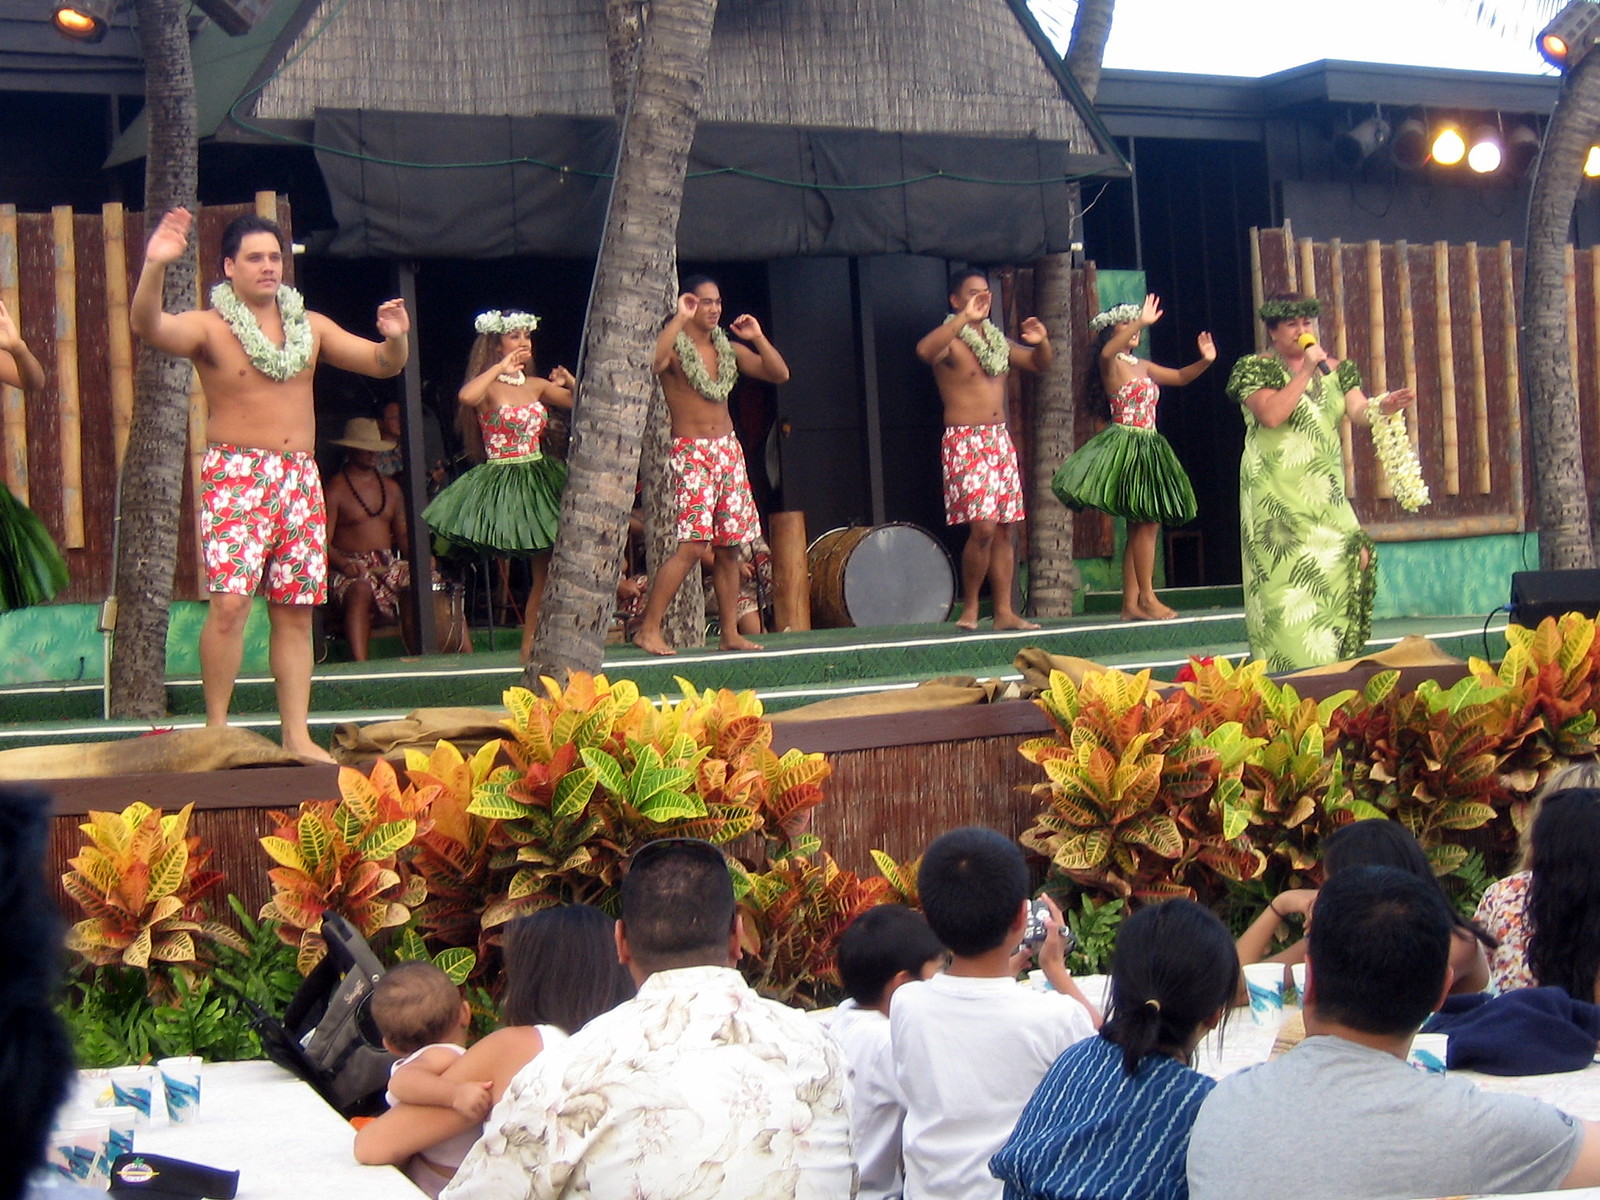 Dancers in grass skirts, board shorts, and leis perform on a stage.